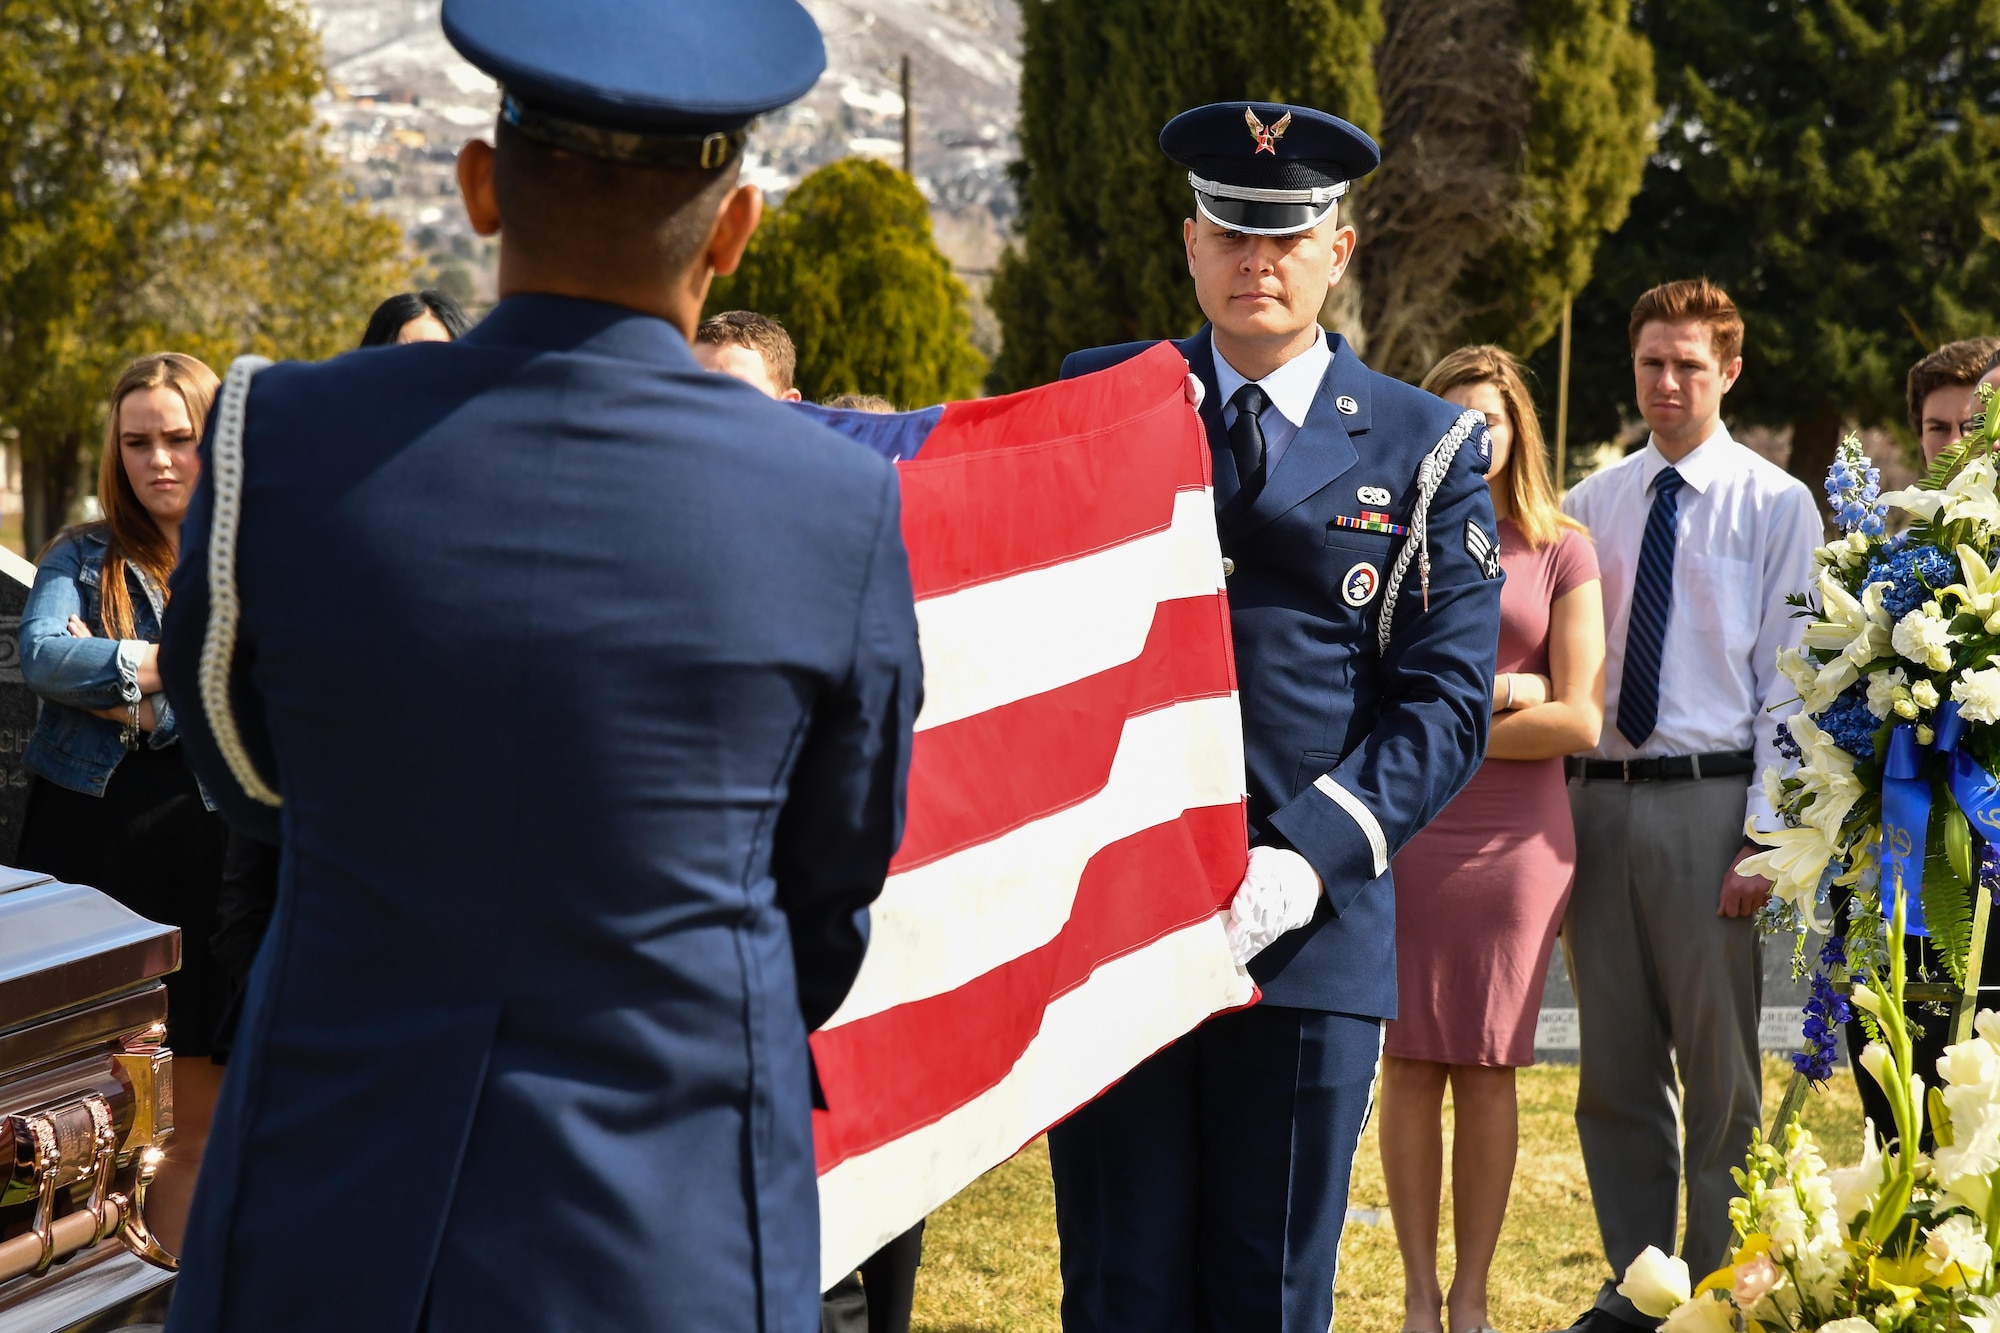 Hill AFB Honor Guard members Airman 1st Class Santos Vargas and Senior Airman James Fahrner perform a two-person flag fold during a veteran’s graveside service, Bountiful, Utah, March 8, 2017. Hill’s honor guard members provide professional military honors for a geographical area of 169,000 square miles (U.S. Air Force photo/R. Nial Bradshaw)